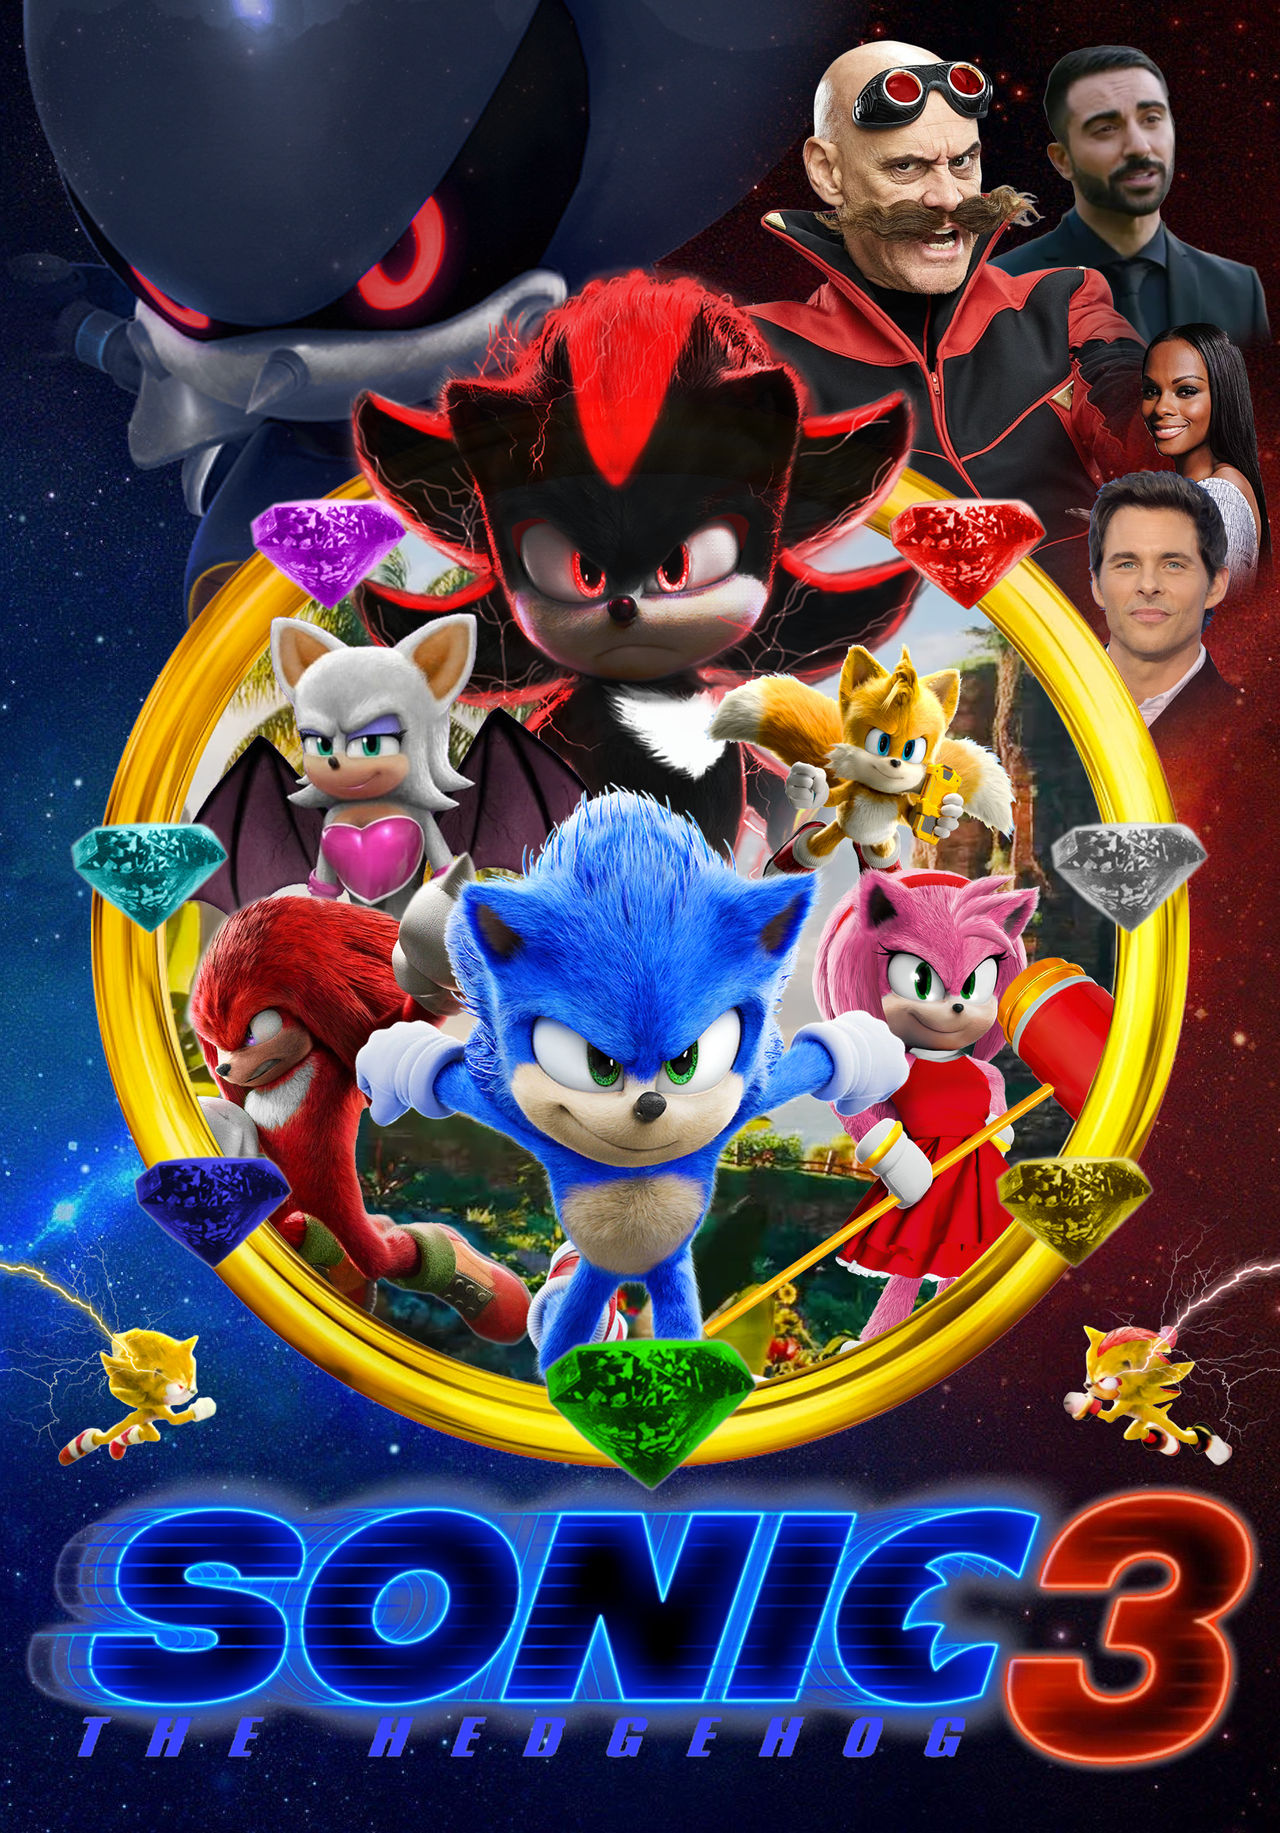 Sonic The Hedgehog 3 Movie Poster on Behance